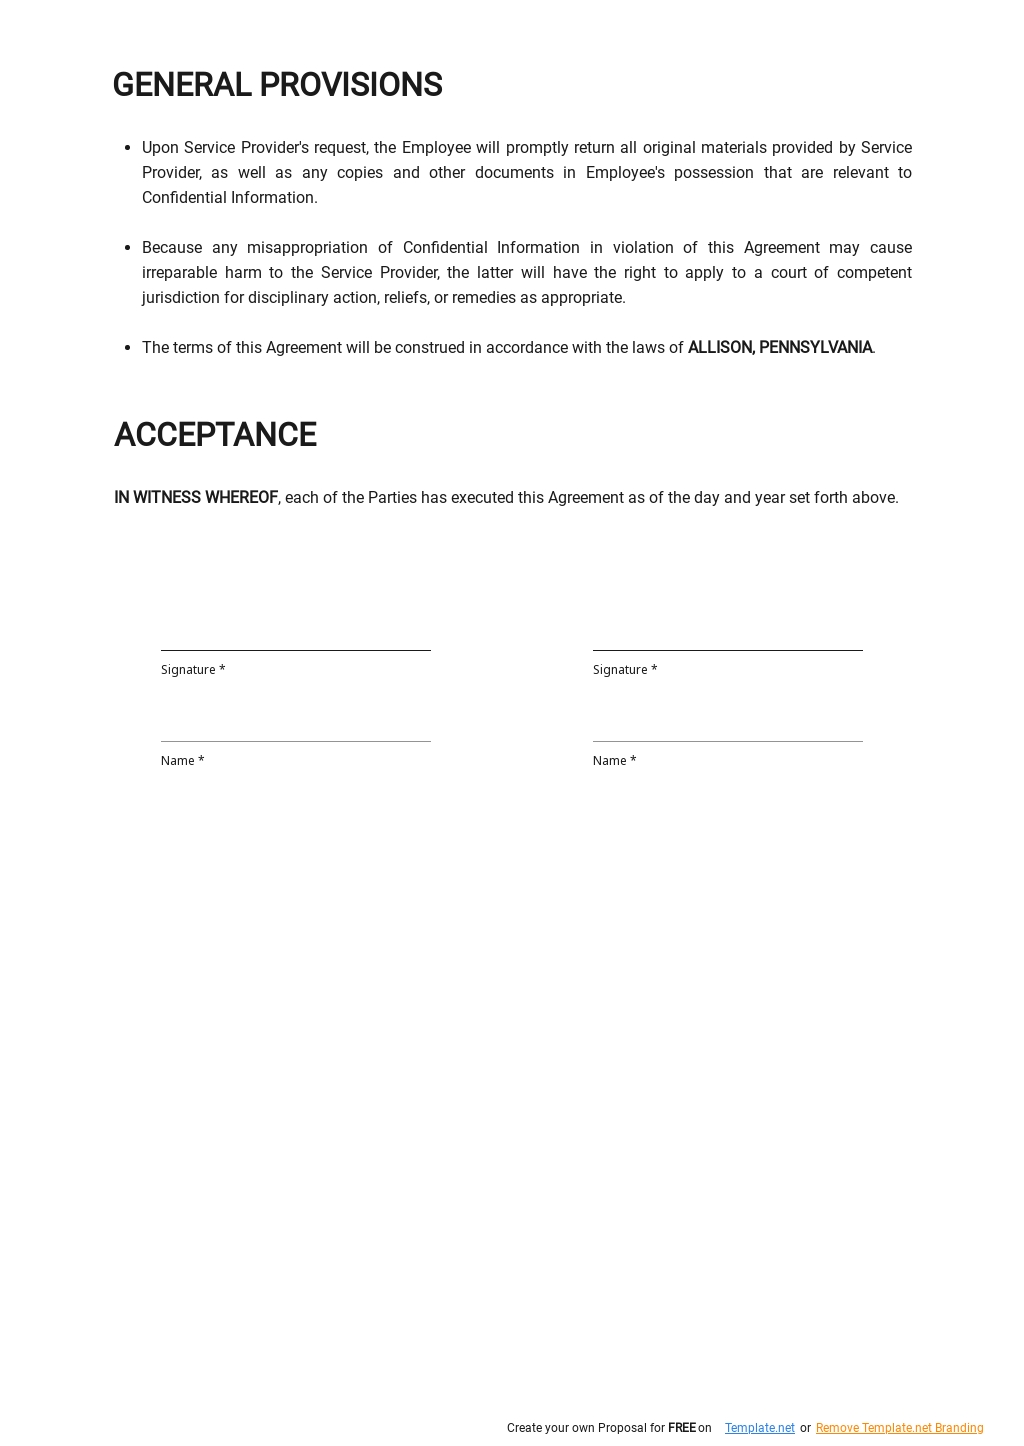 Medical Employee Confidentiality Agreement Template 2.jpe